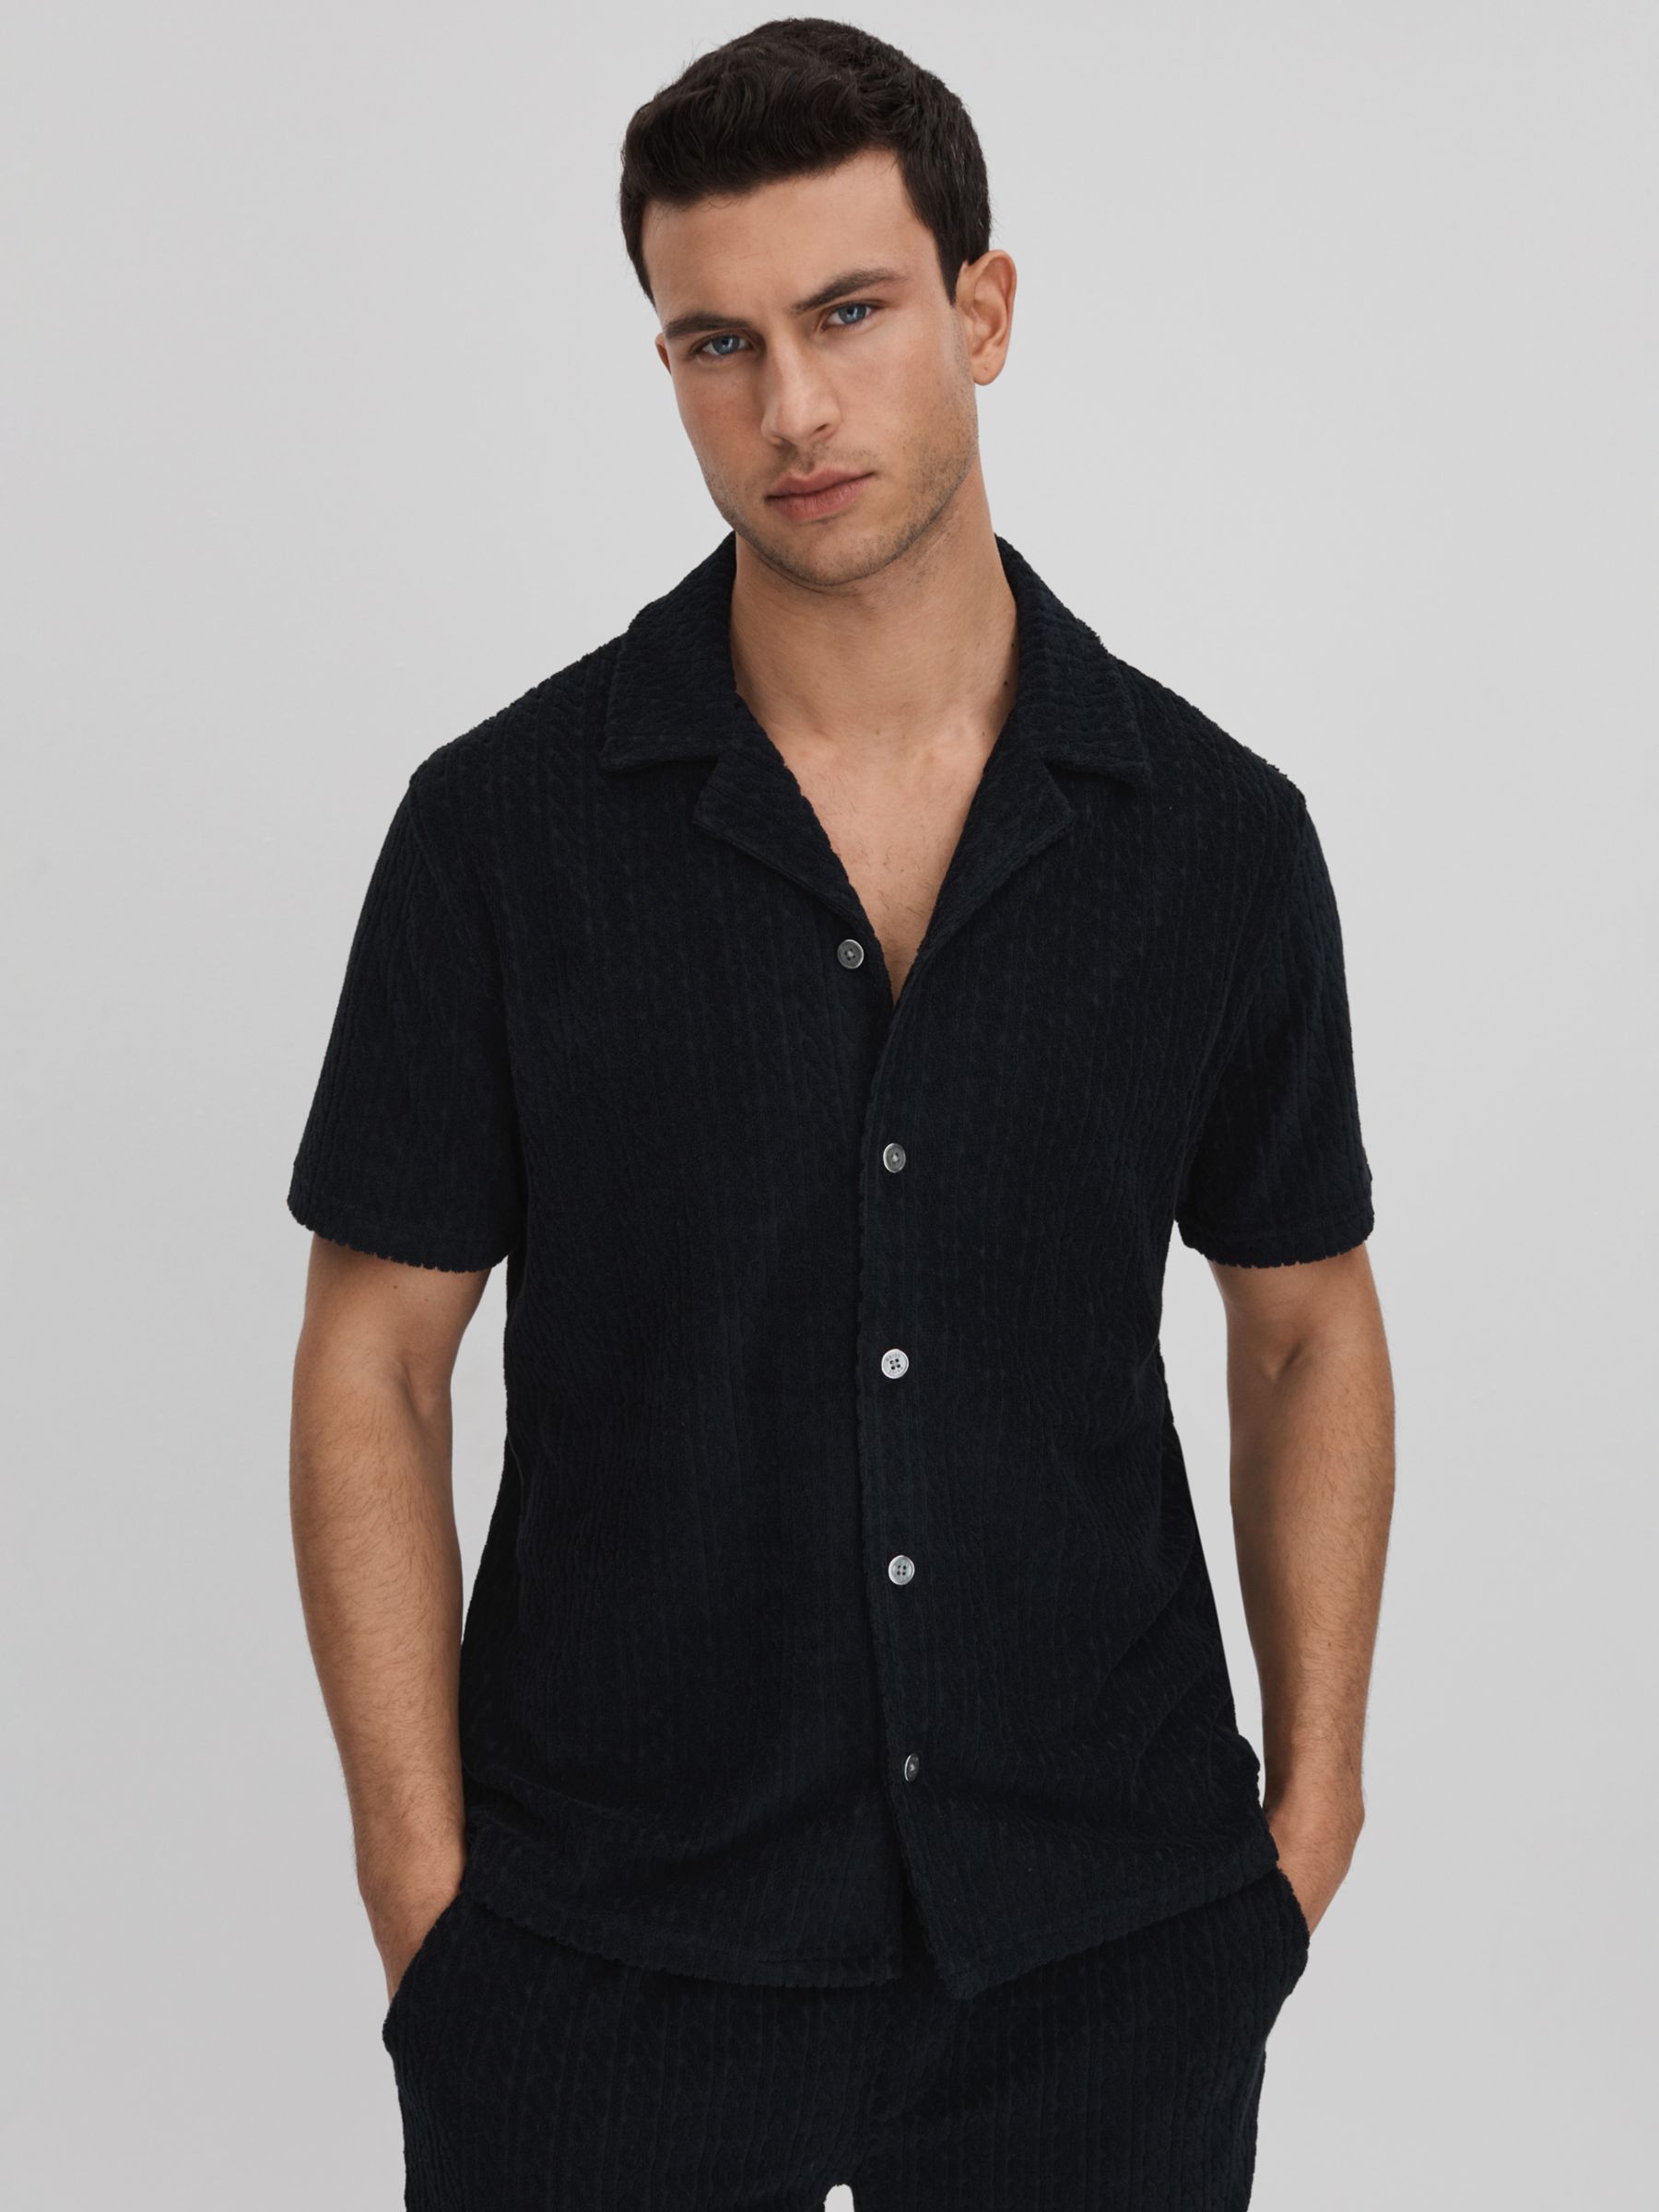 Buy Reiss Bay Cuban Cable Towelling Shirt, Navy Online at johnlewis.com